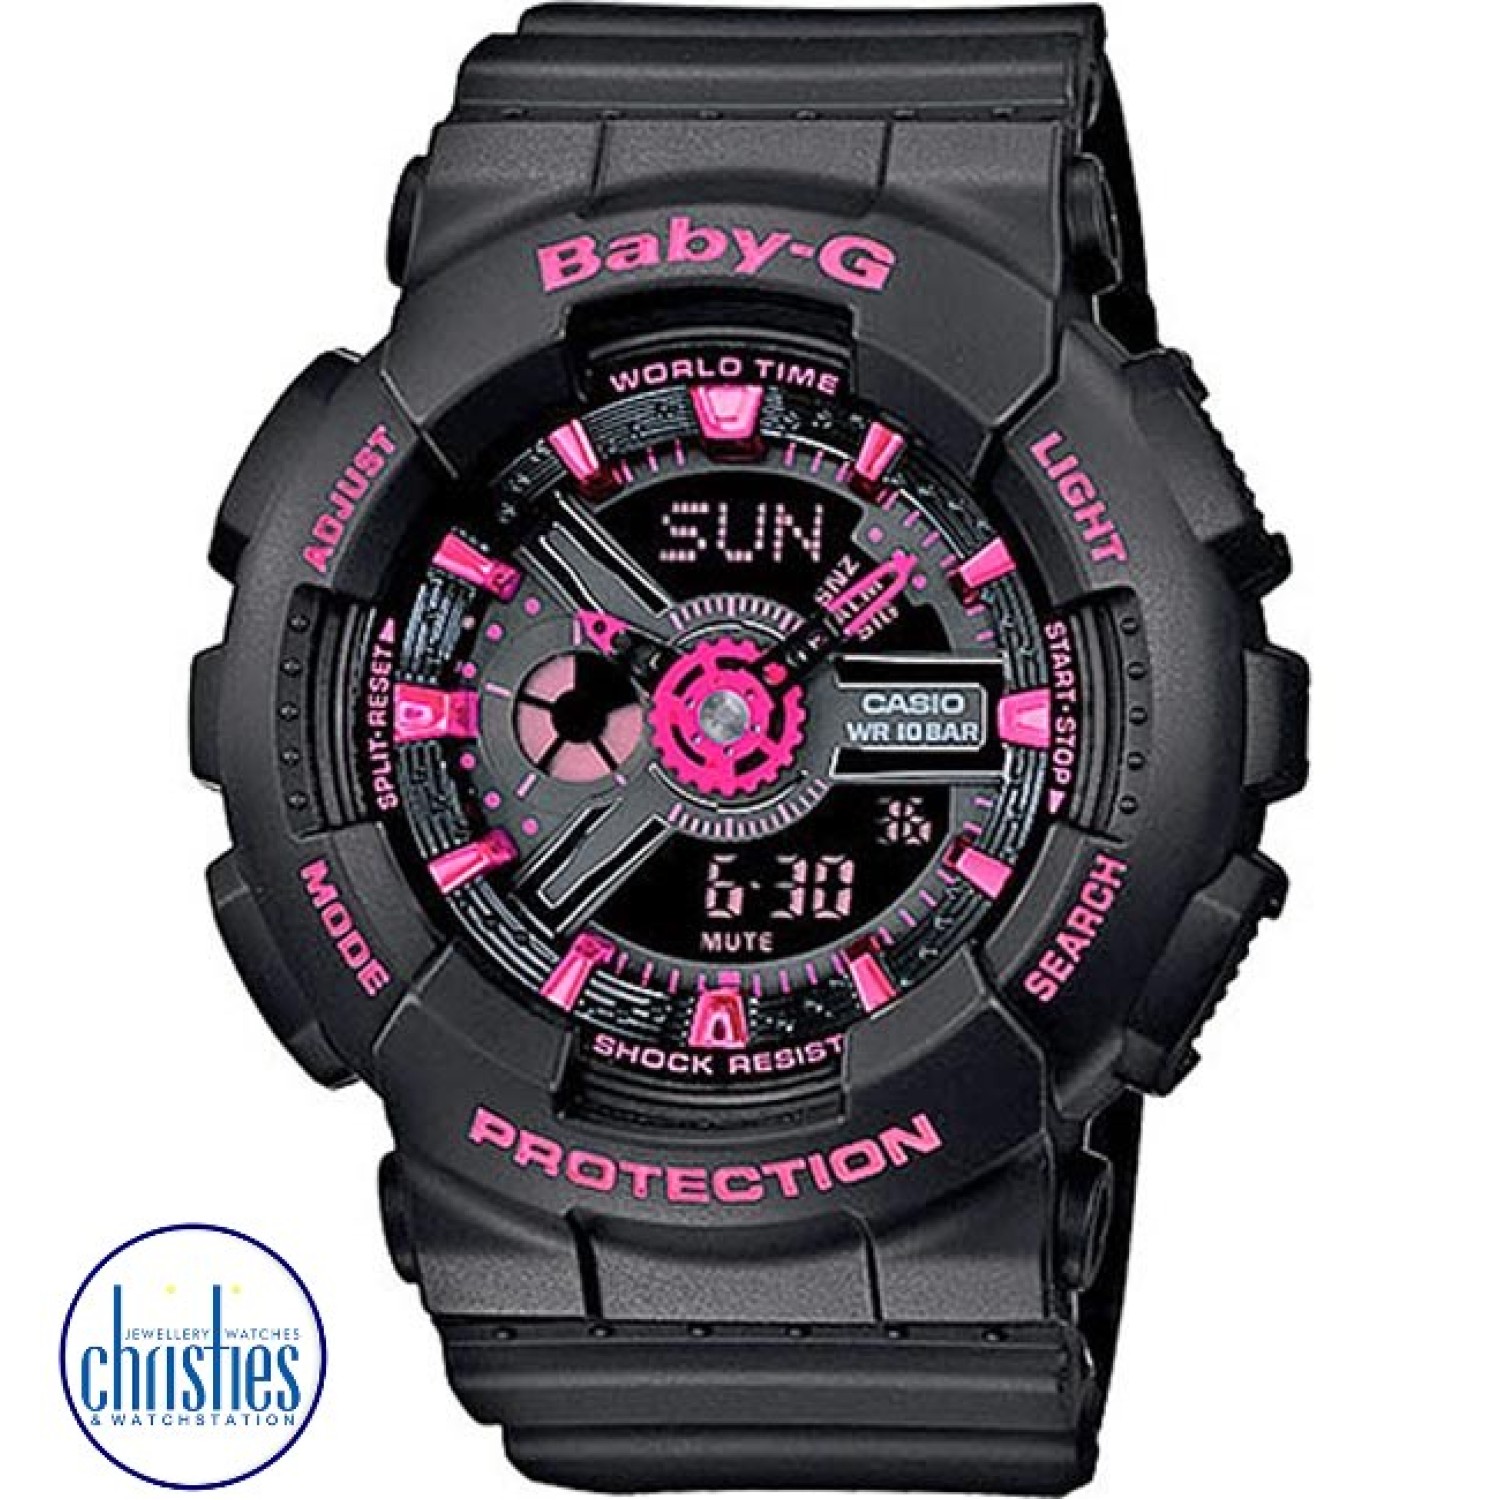 BA111-1A  Casio Baby-G Neon Series. This new street fashion neon colour is the latest addition to the popular BA110 Series. The dial of this model is basic black, accented with pink. Layered construction creates a multi-dimensional design that is accented